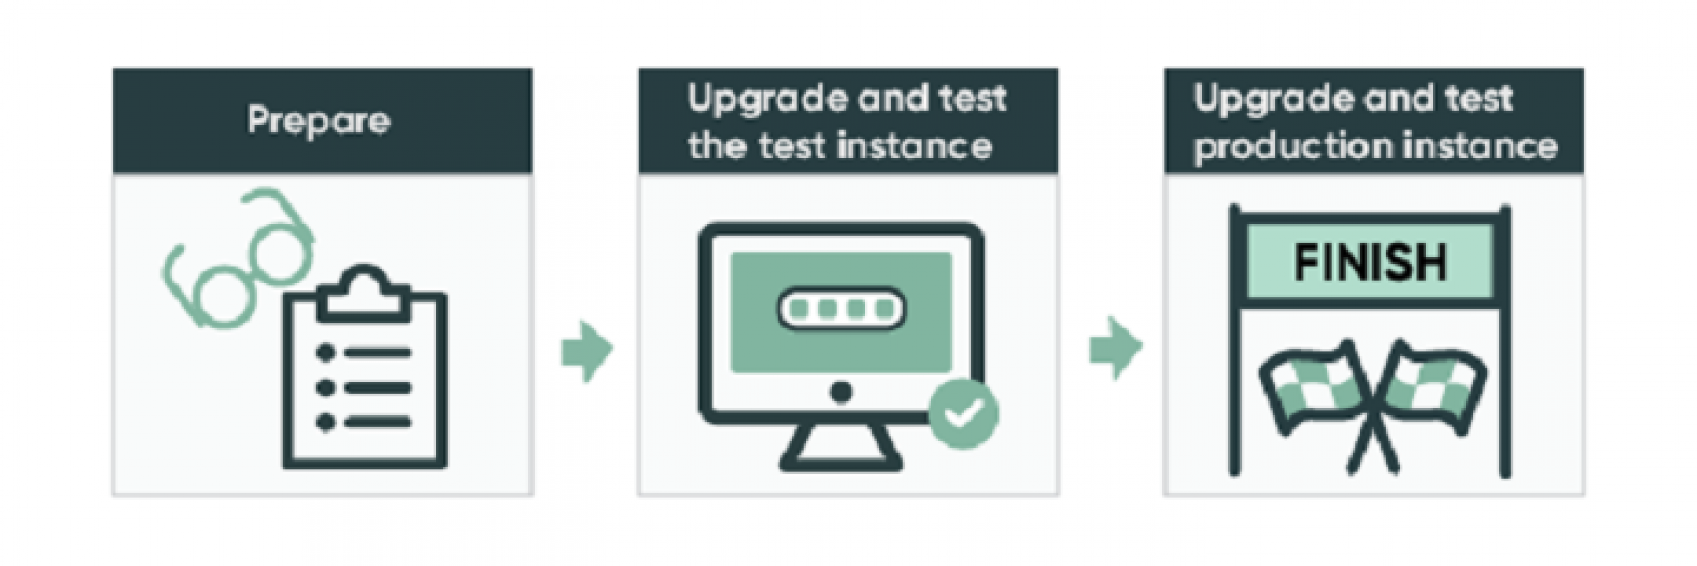 Diagram showing upgrade cycle for ServiceNow. Step 1: Prepare. Step 2: Upgrade and test the test instance. Step 3: Upgrade and test production instance